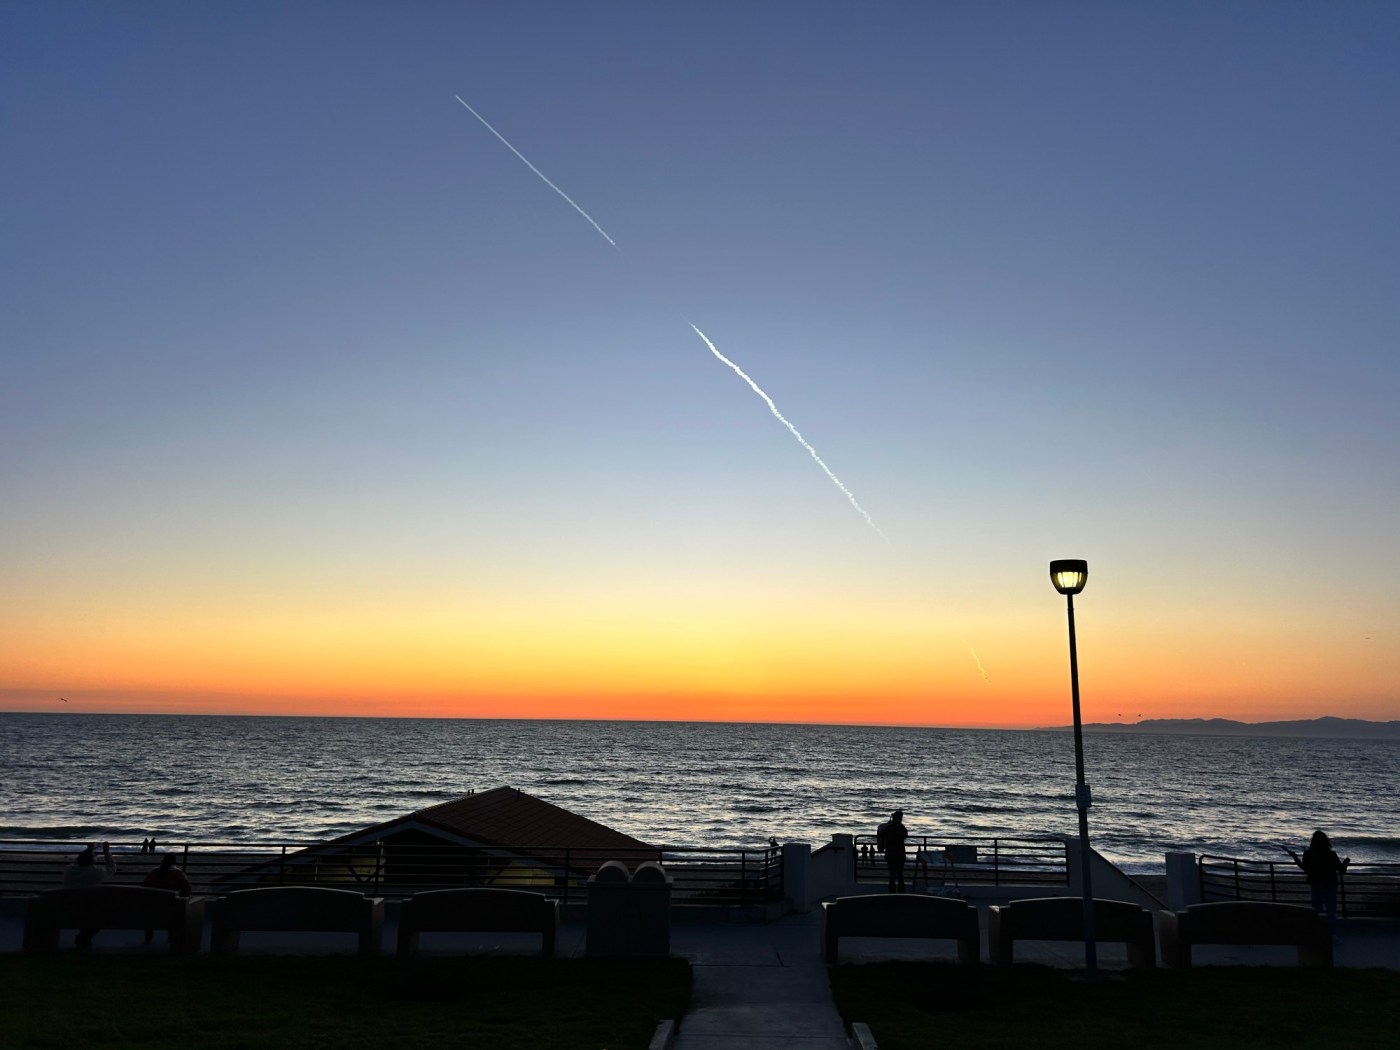 spacex-launch-set-for-thursday-morning-from-vandenberg